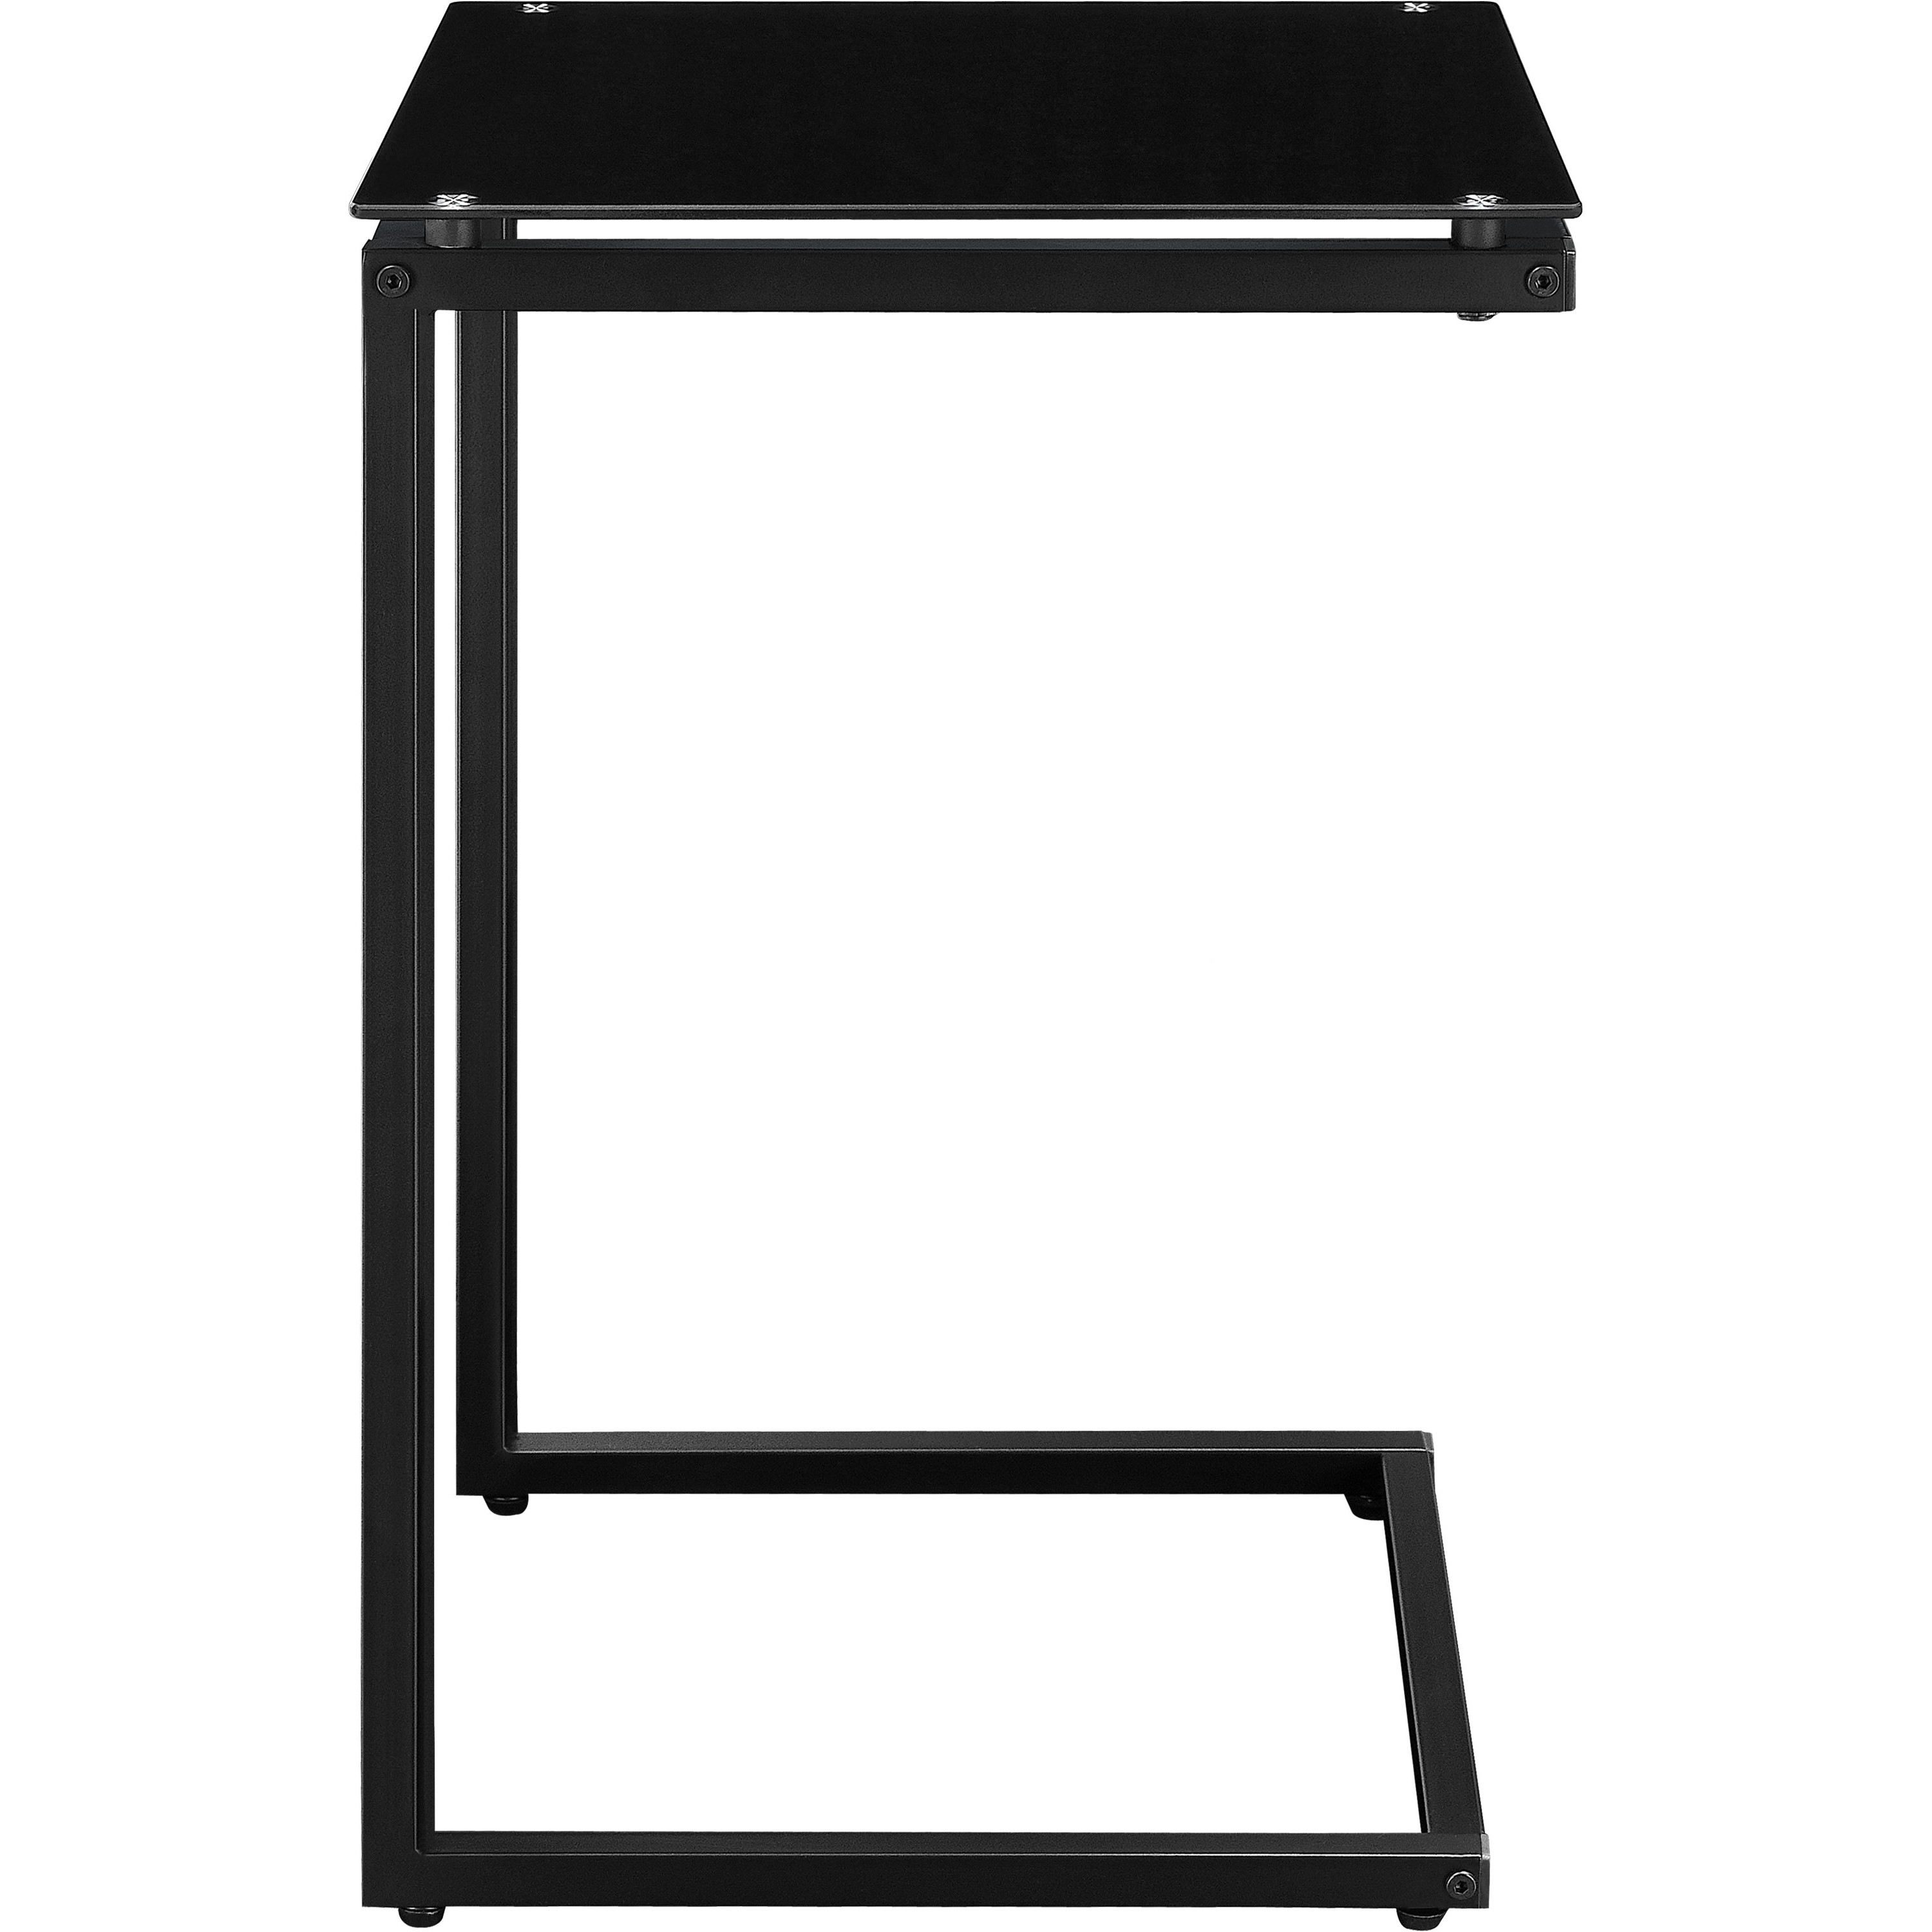 small living room sets the fantastic amazing altra parsons end stylish shaped table for your home printableboutique modern black metal with drawer white banquet dimensions